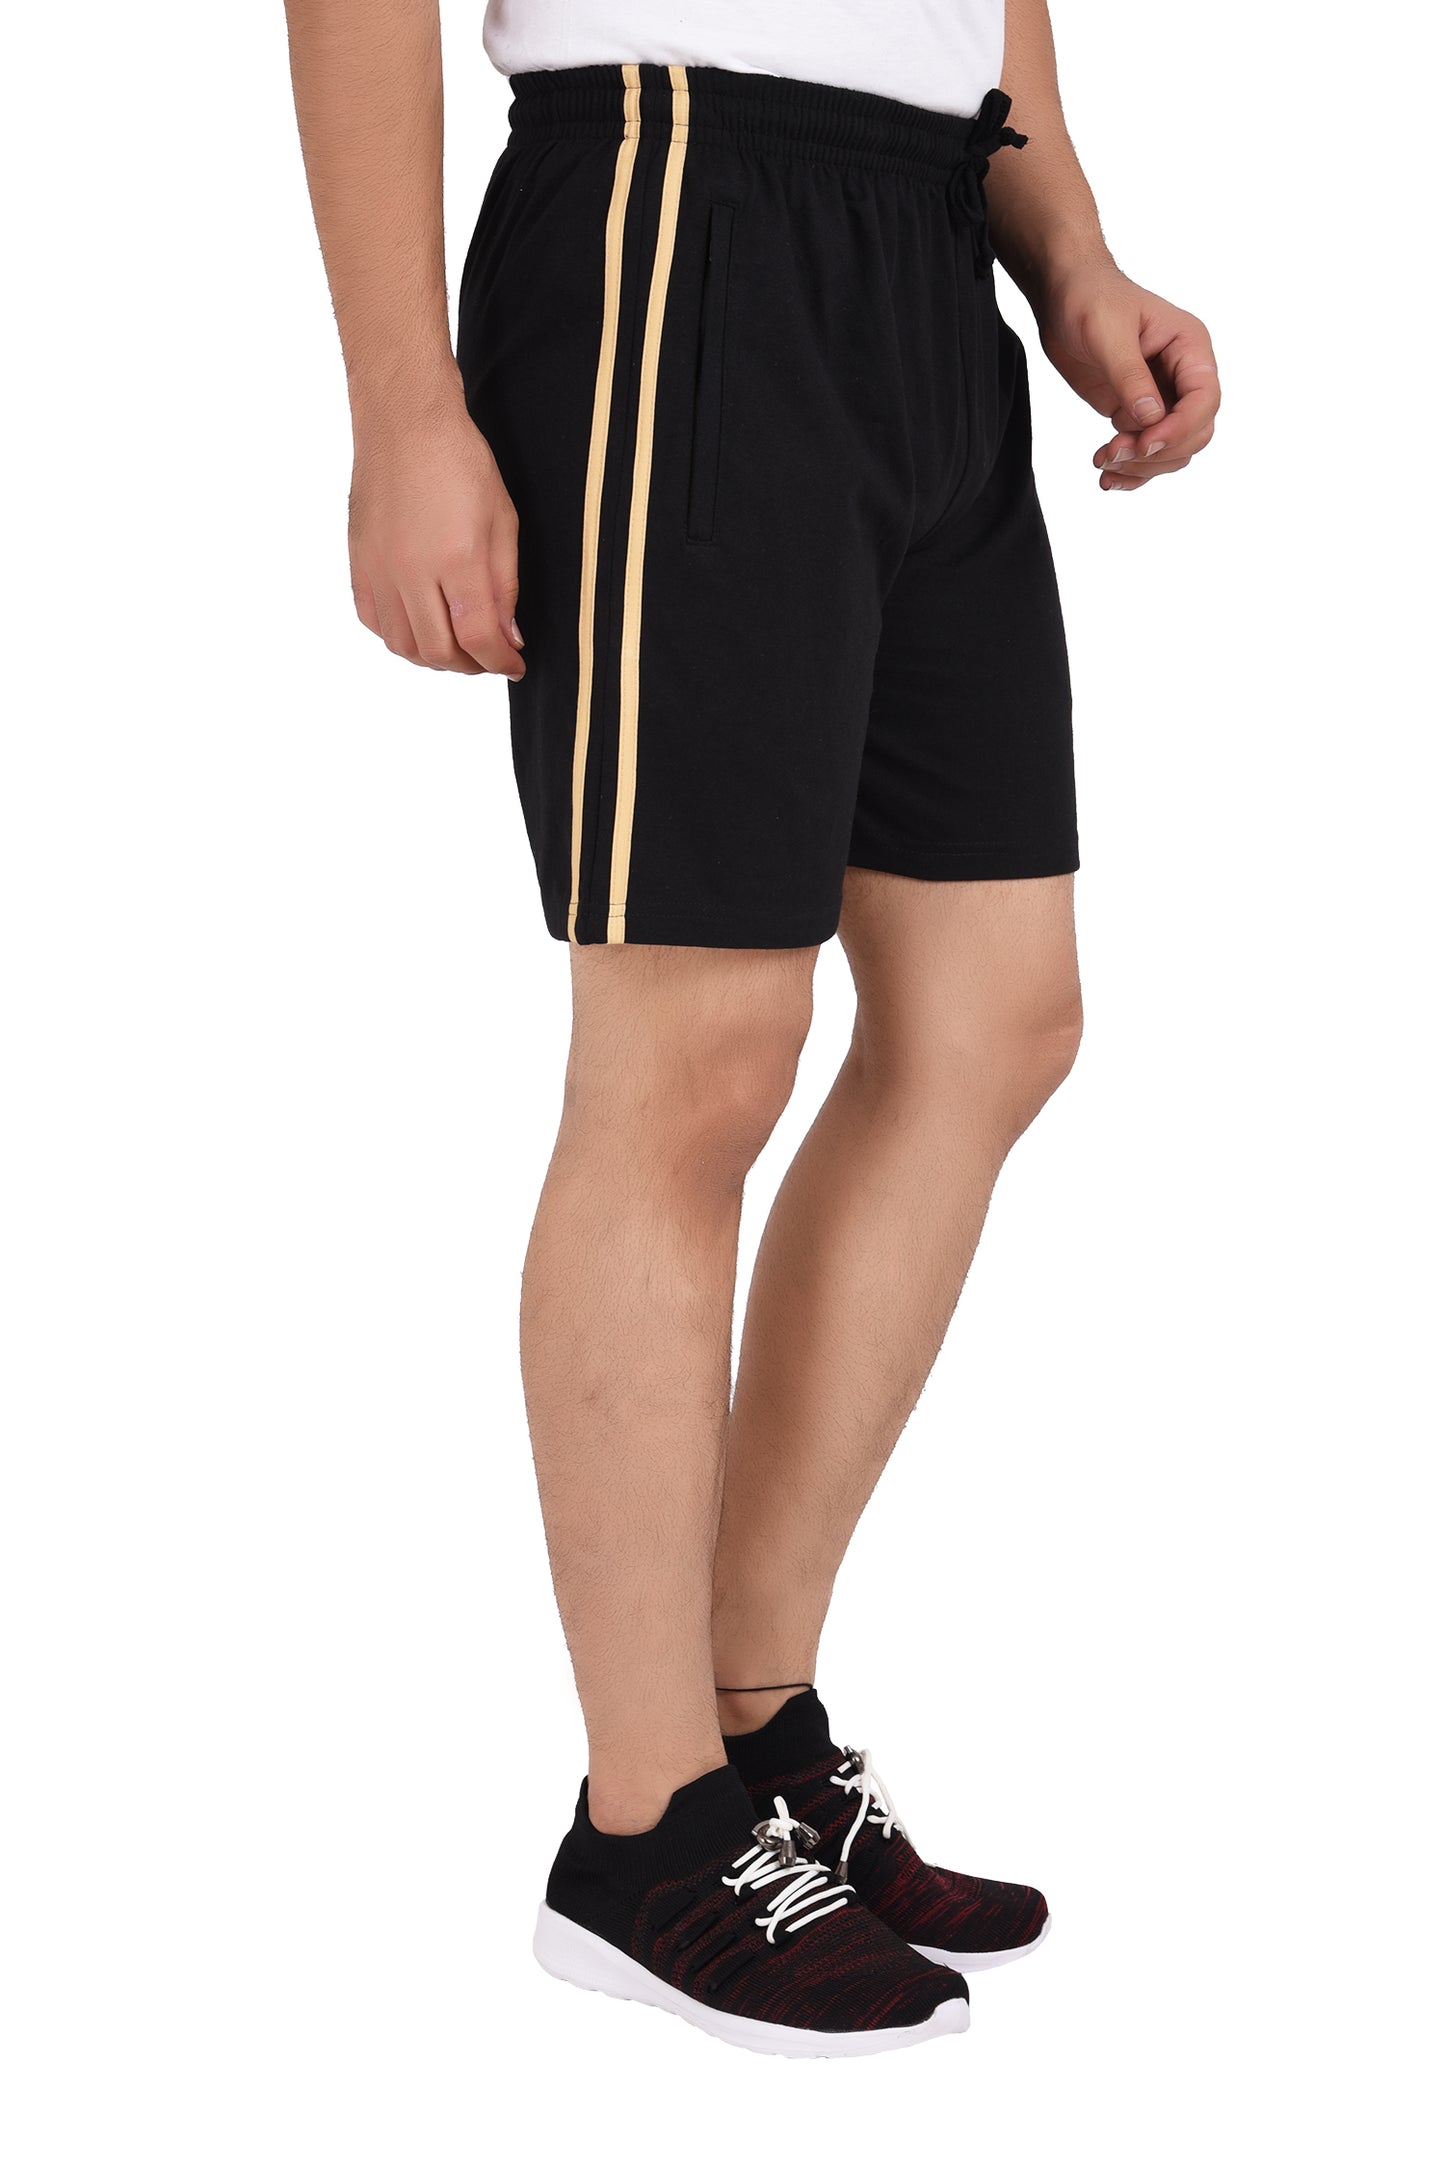 NEO GARMENTS Men’s Cotton Stripped Chain Pockets Long Shorts. | BLACK | SIZES FROM M TO 7XL.